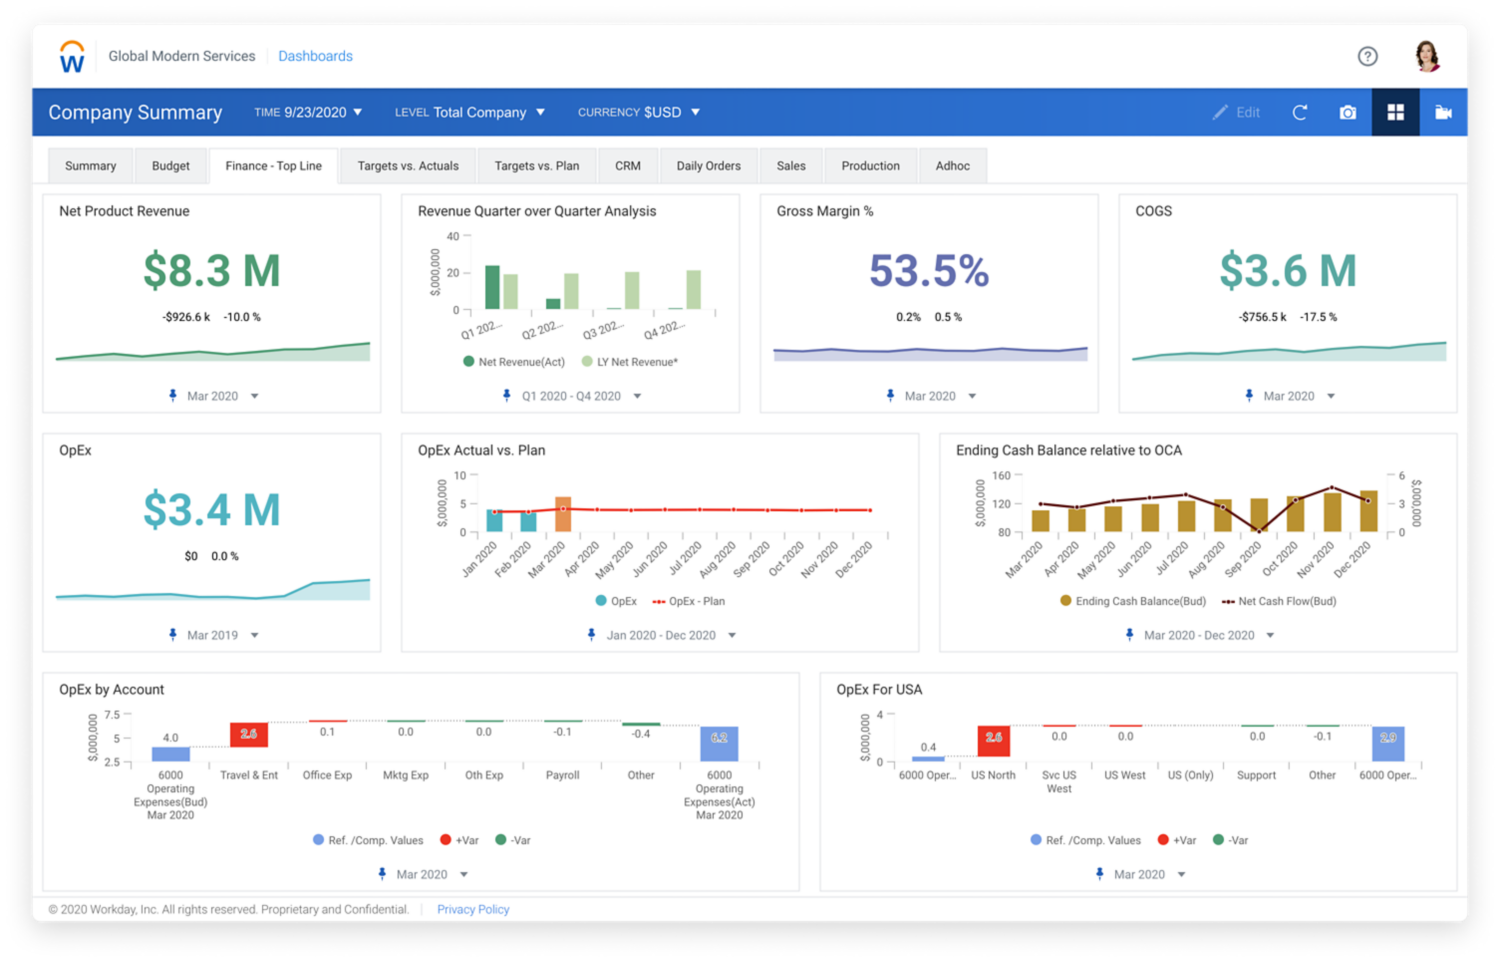 Workday Adaptive Planning's financial analytics dashboard showing bar graphs and numerical values for Top Line finance including Net Product Revenue, Gross Margin percent